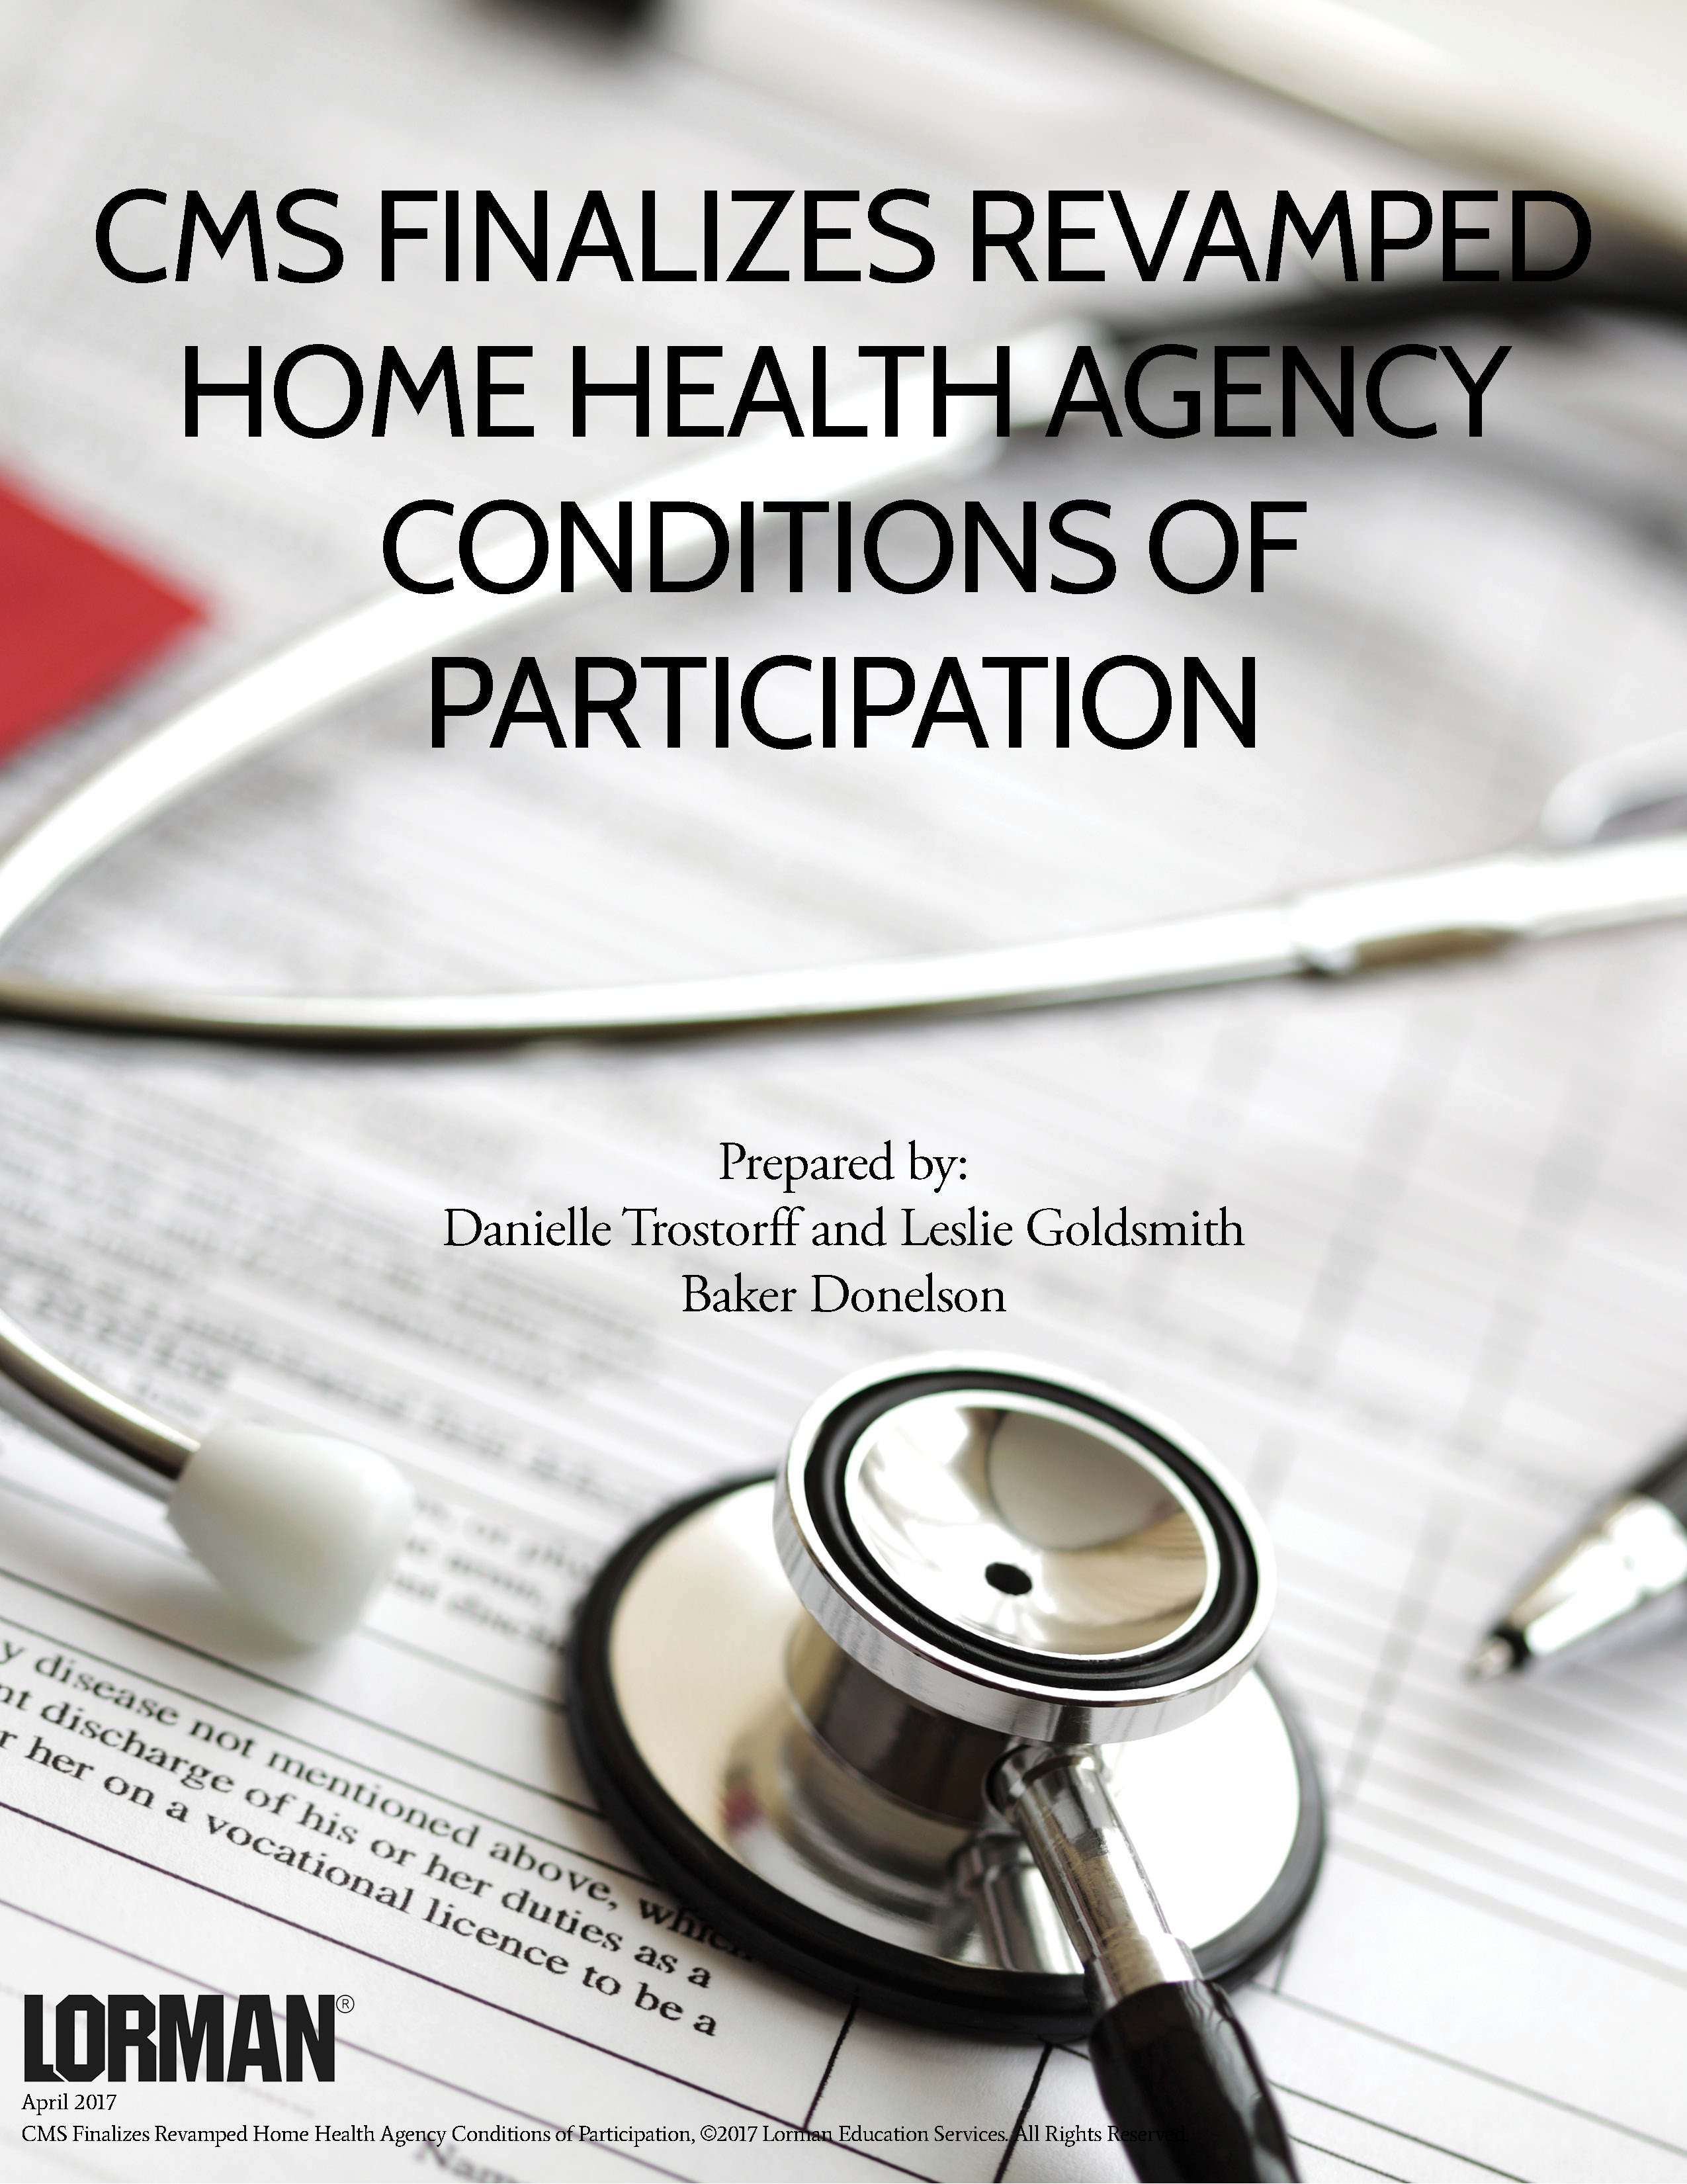 CMS Finalizes Revamped Home Health Agency Conditions of Participation